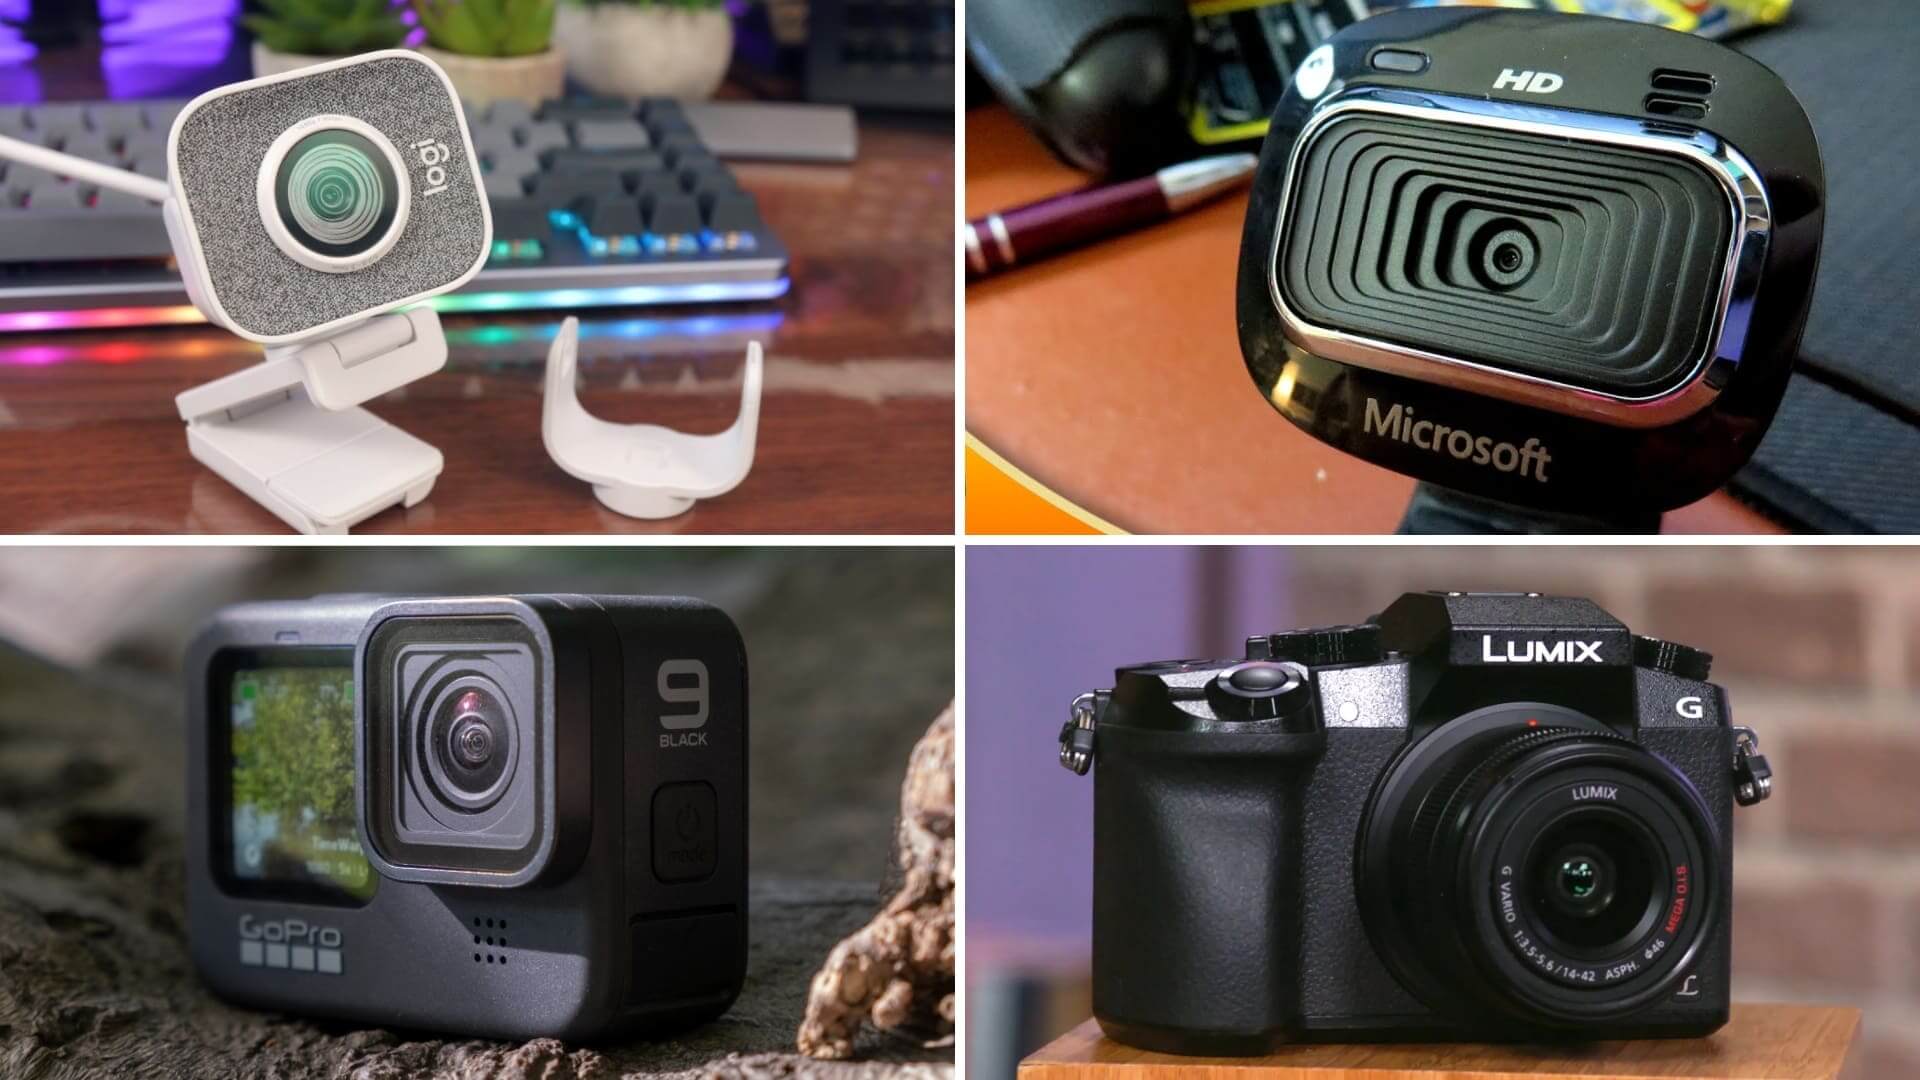 What's the Best Camera for Live Streaming? - Live Stream Equipment